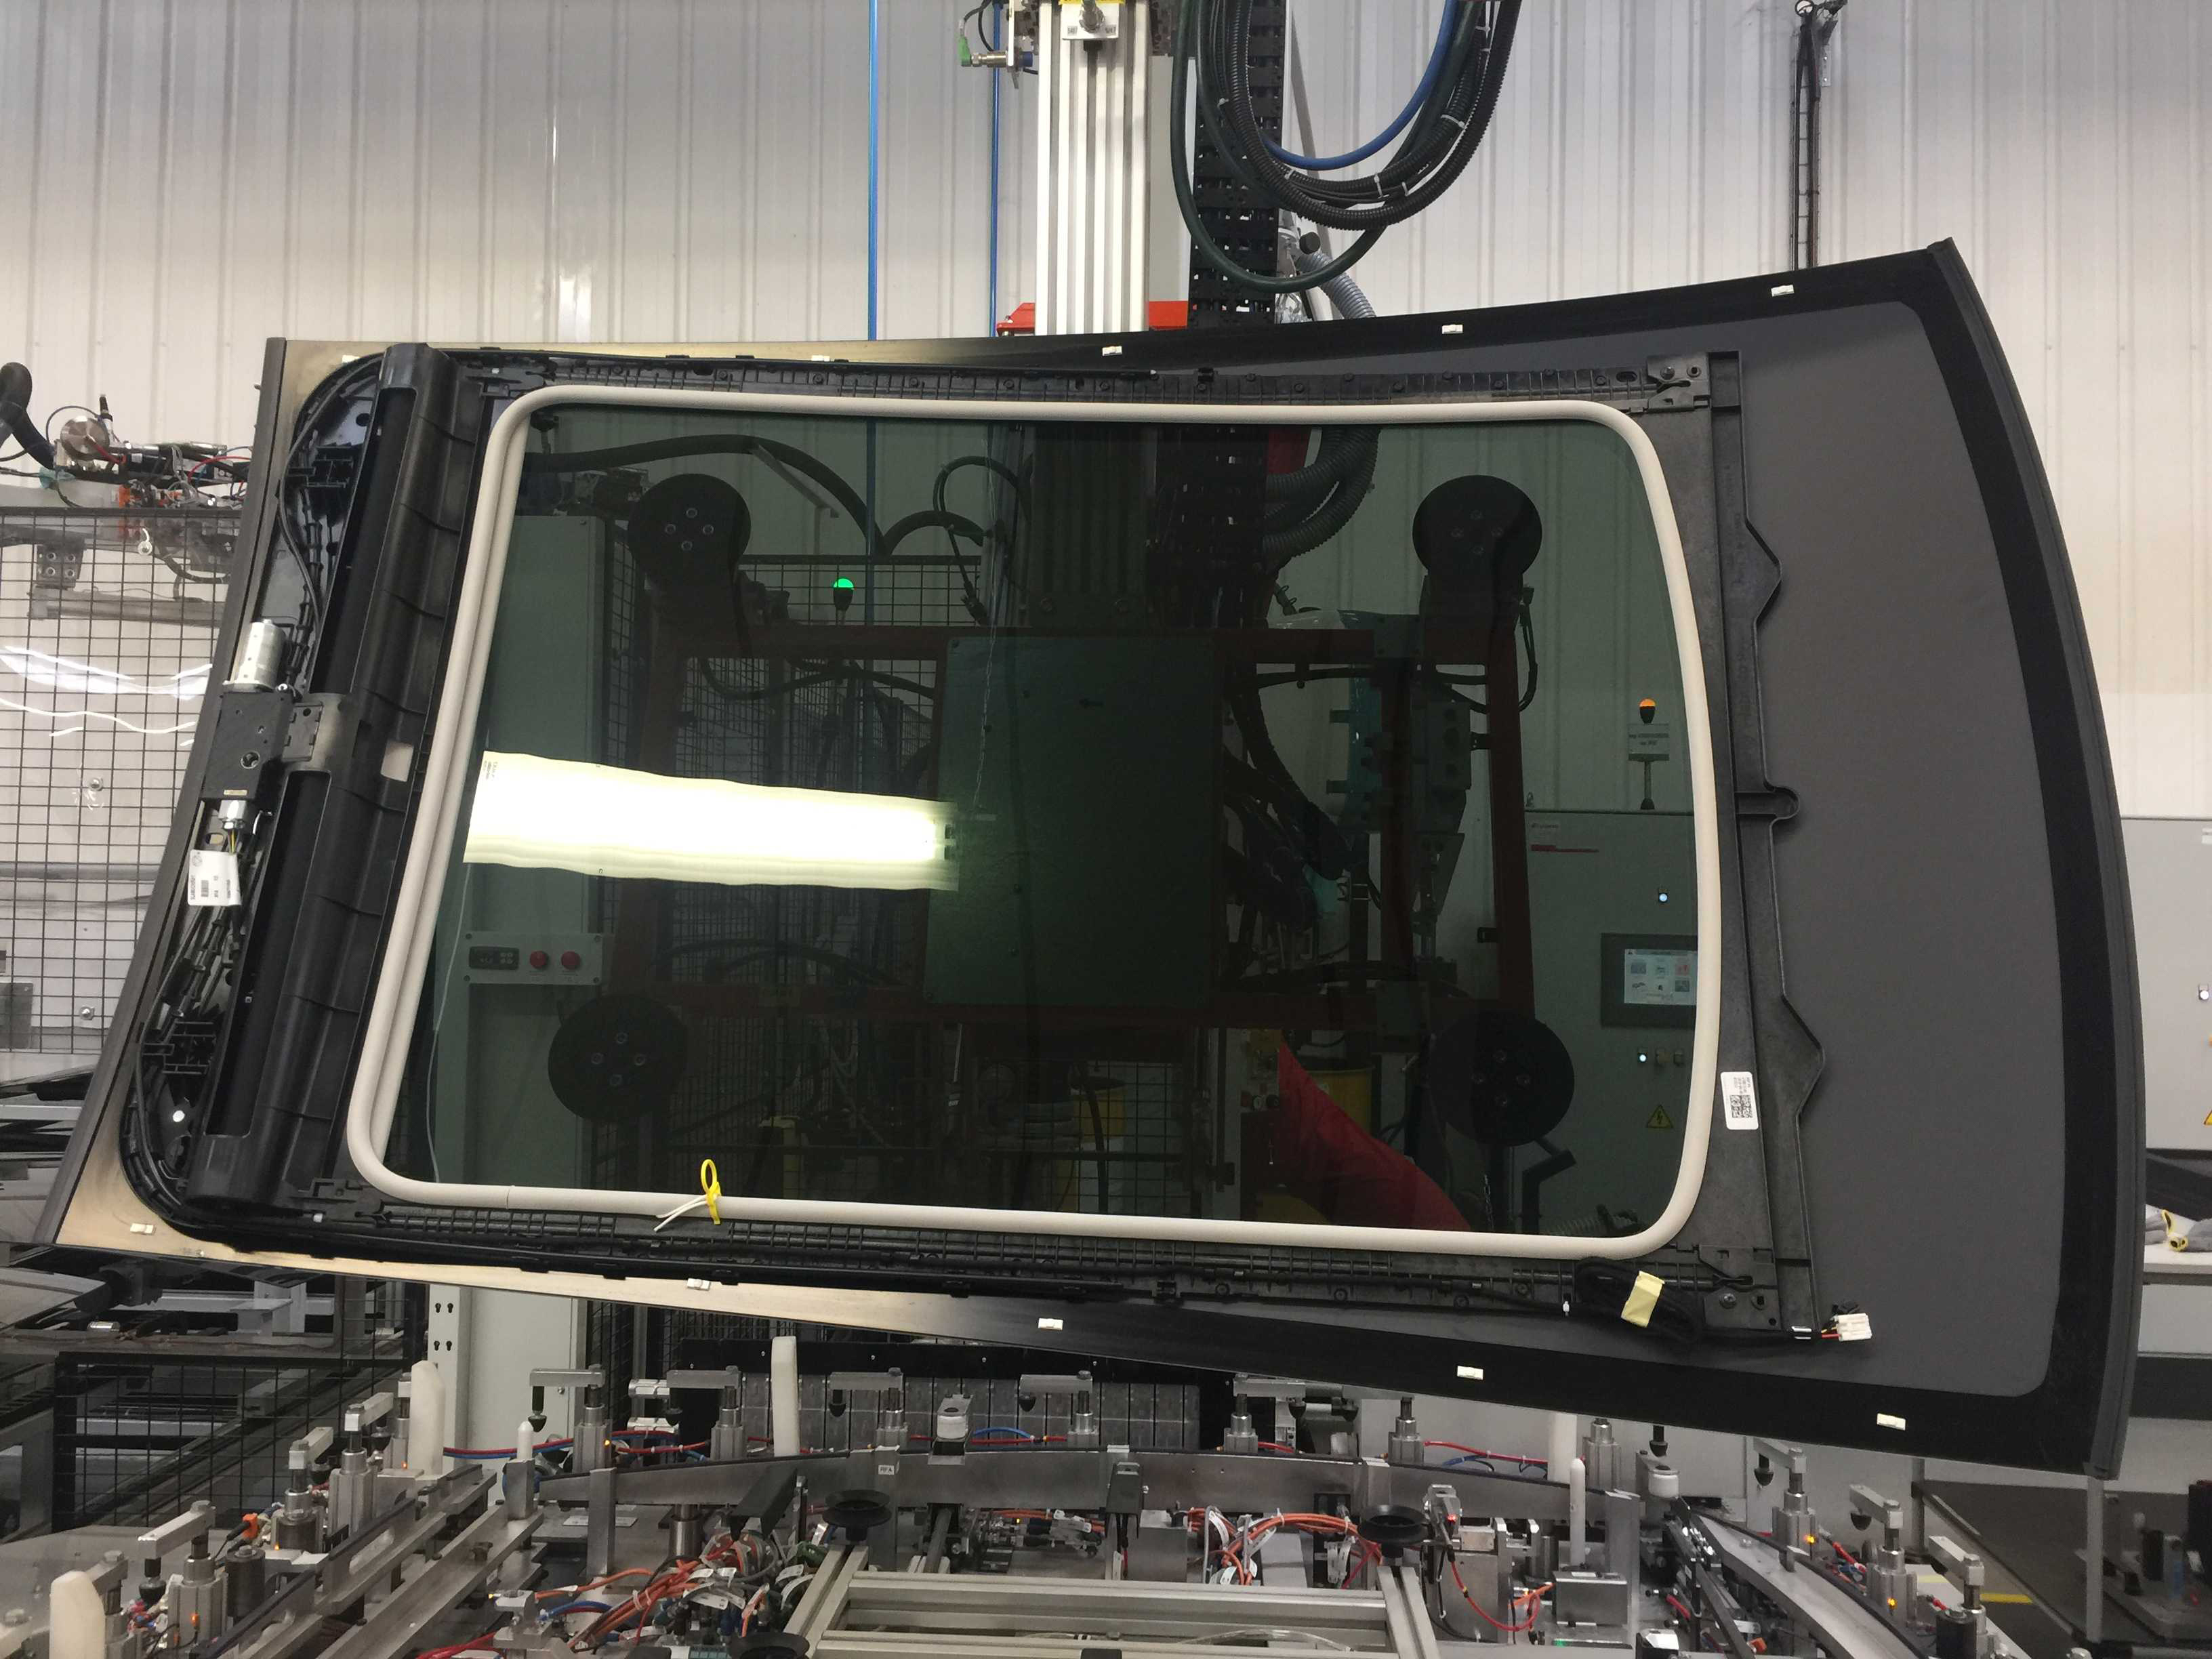 The sunroof module arrives at Renault’s assembly plant fully assembled and pretested as a one-piece ready to install unit. (Photo courtesy Polyscope.)